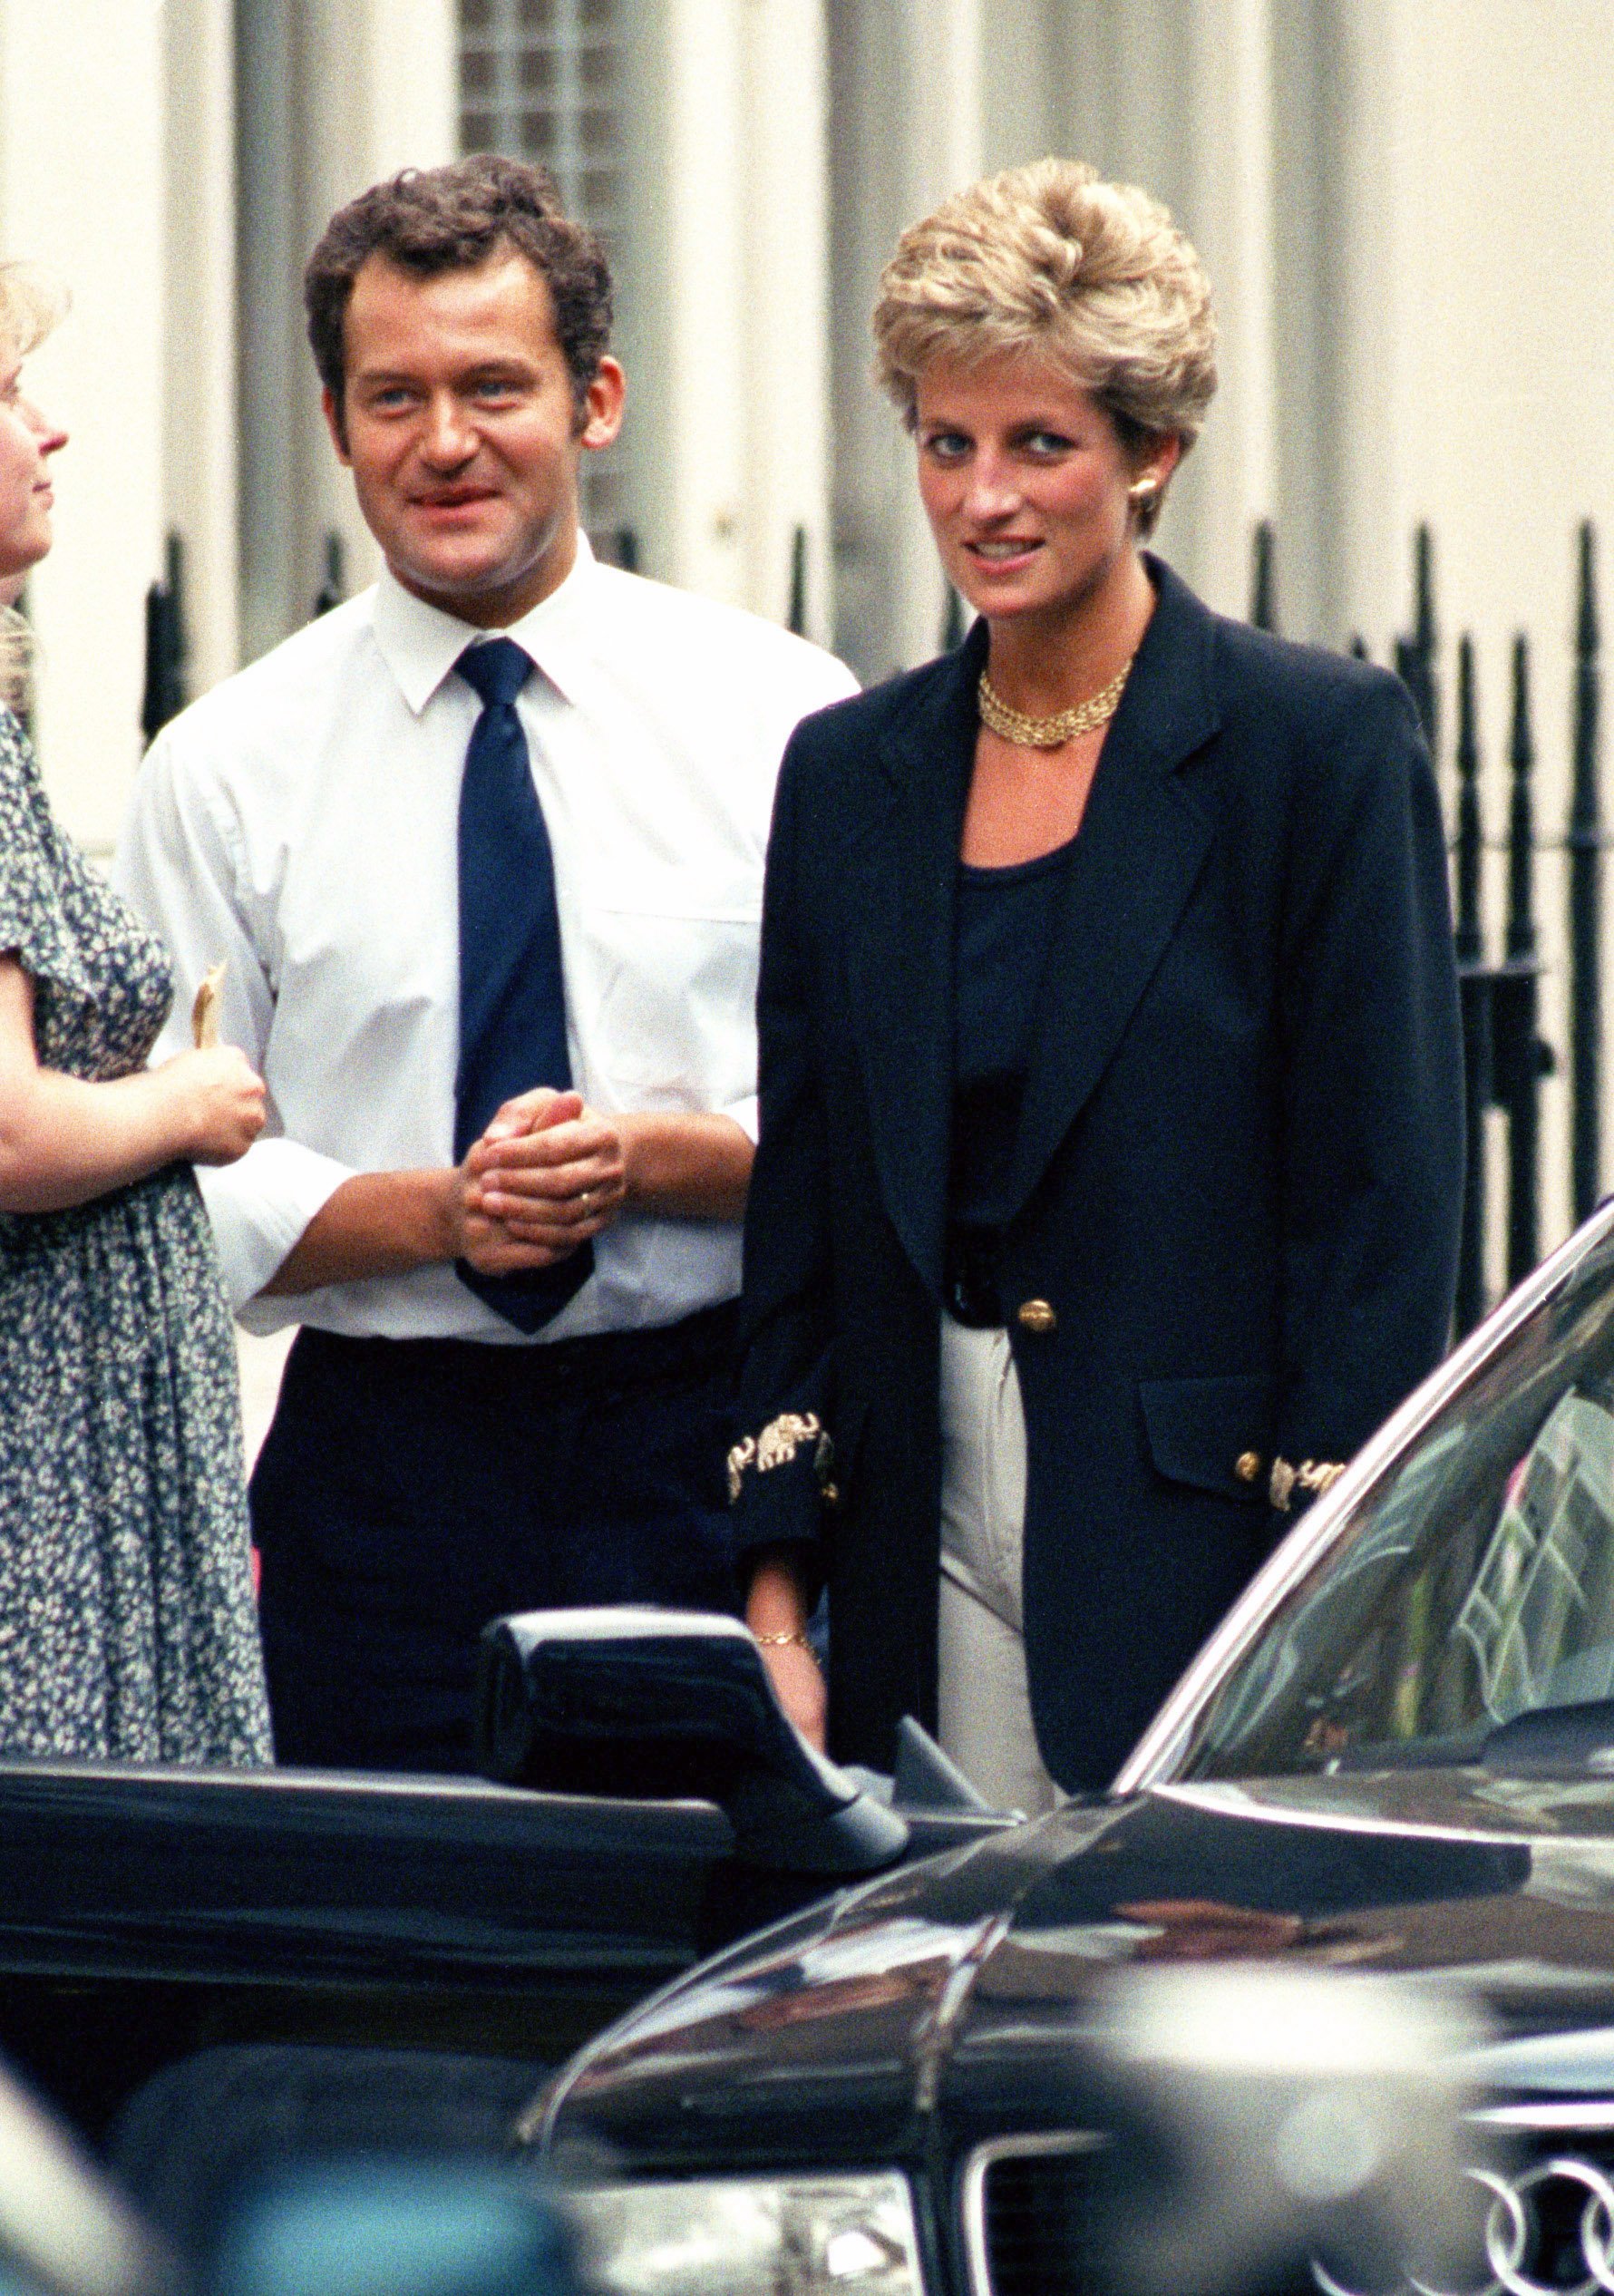 Princess Diana with her butler, Paul Burrell, in 1994